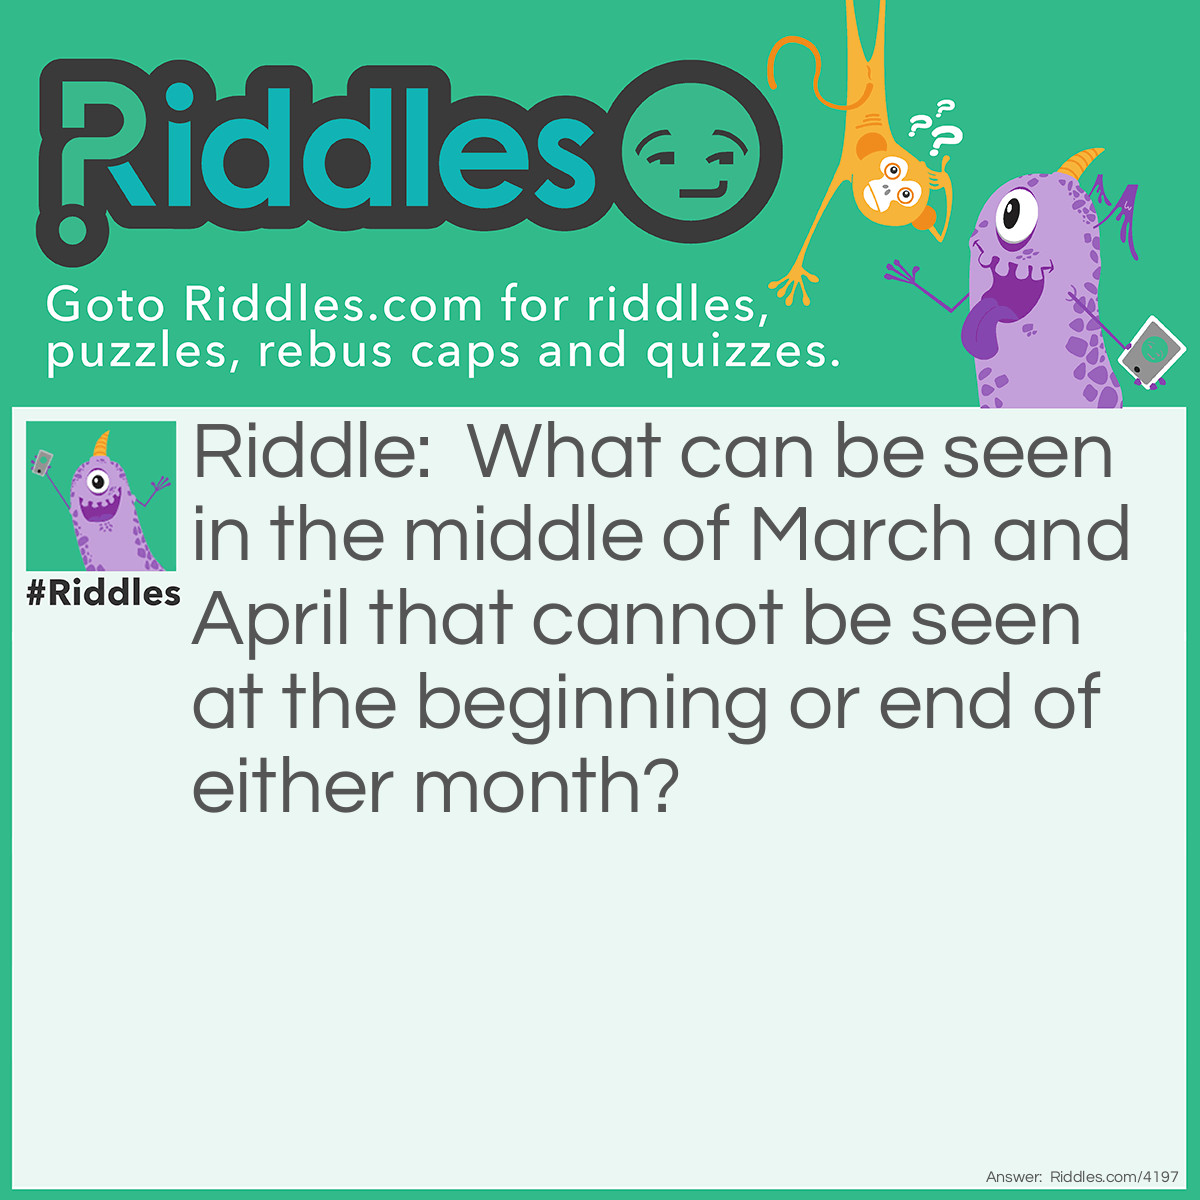 Riddle: What can be seen in the middle of March and April that cannot be seen at the beginning or end of either month? Answer: The letter R.